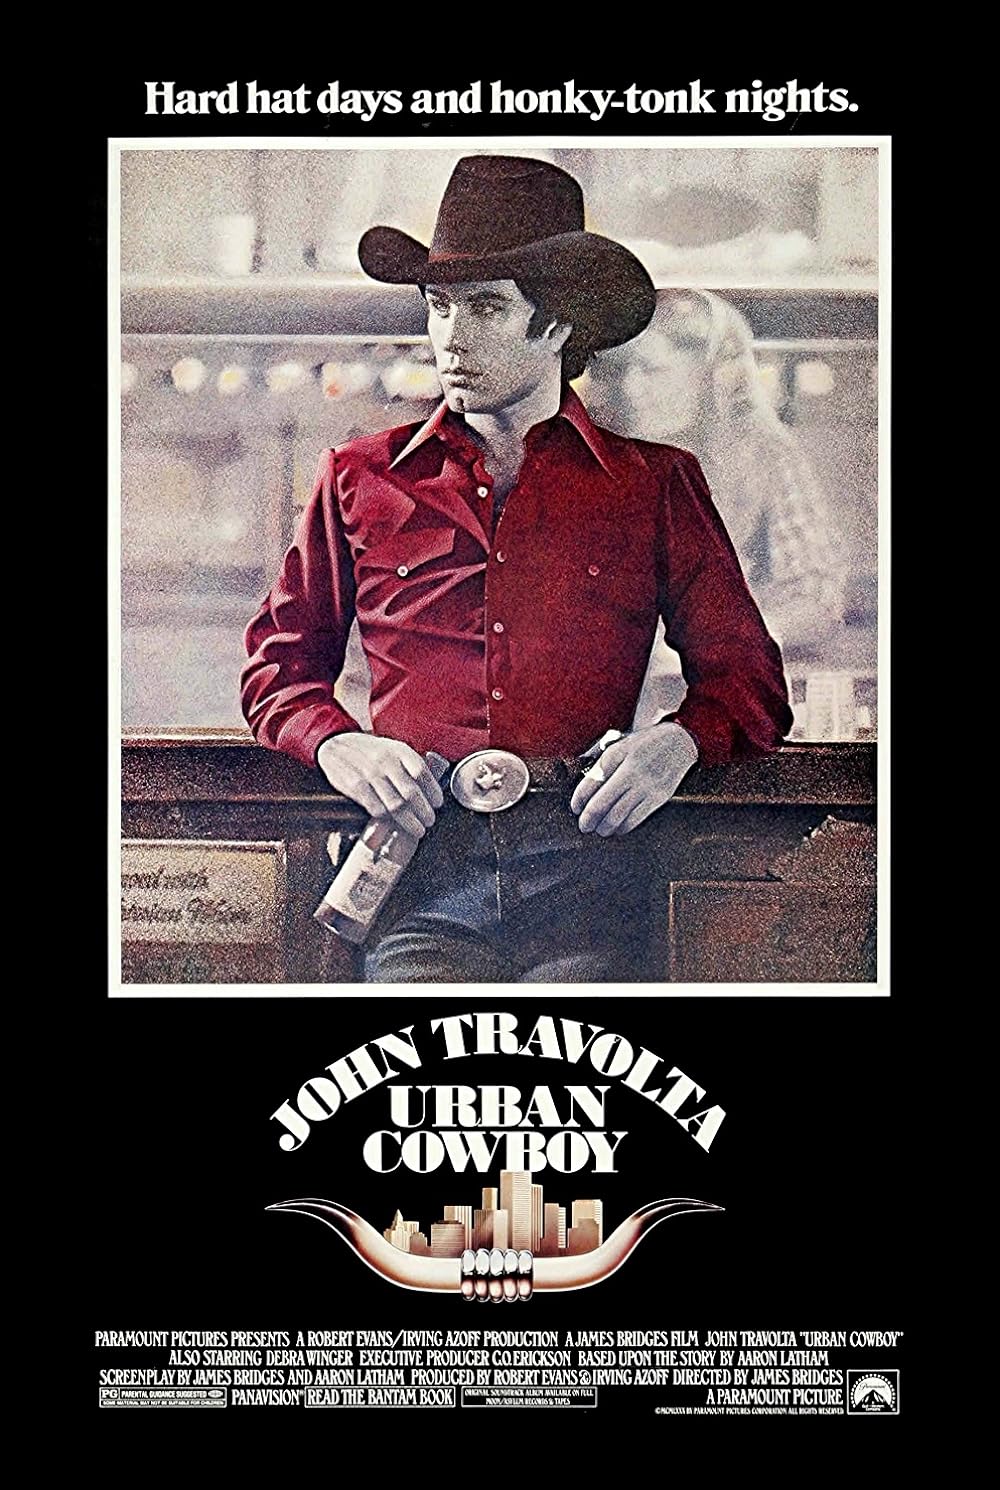 Urban Cowboy Facts - This is the movie poster